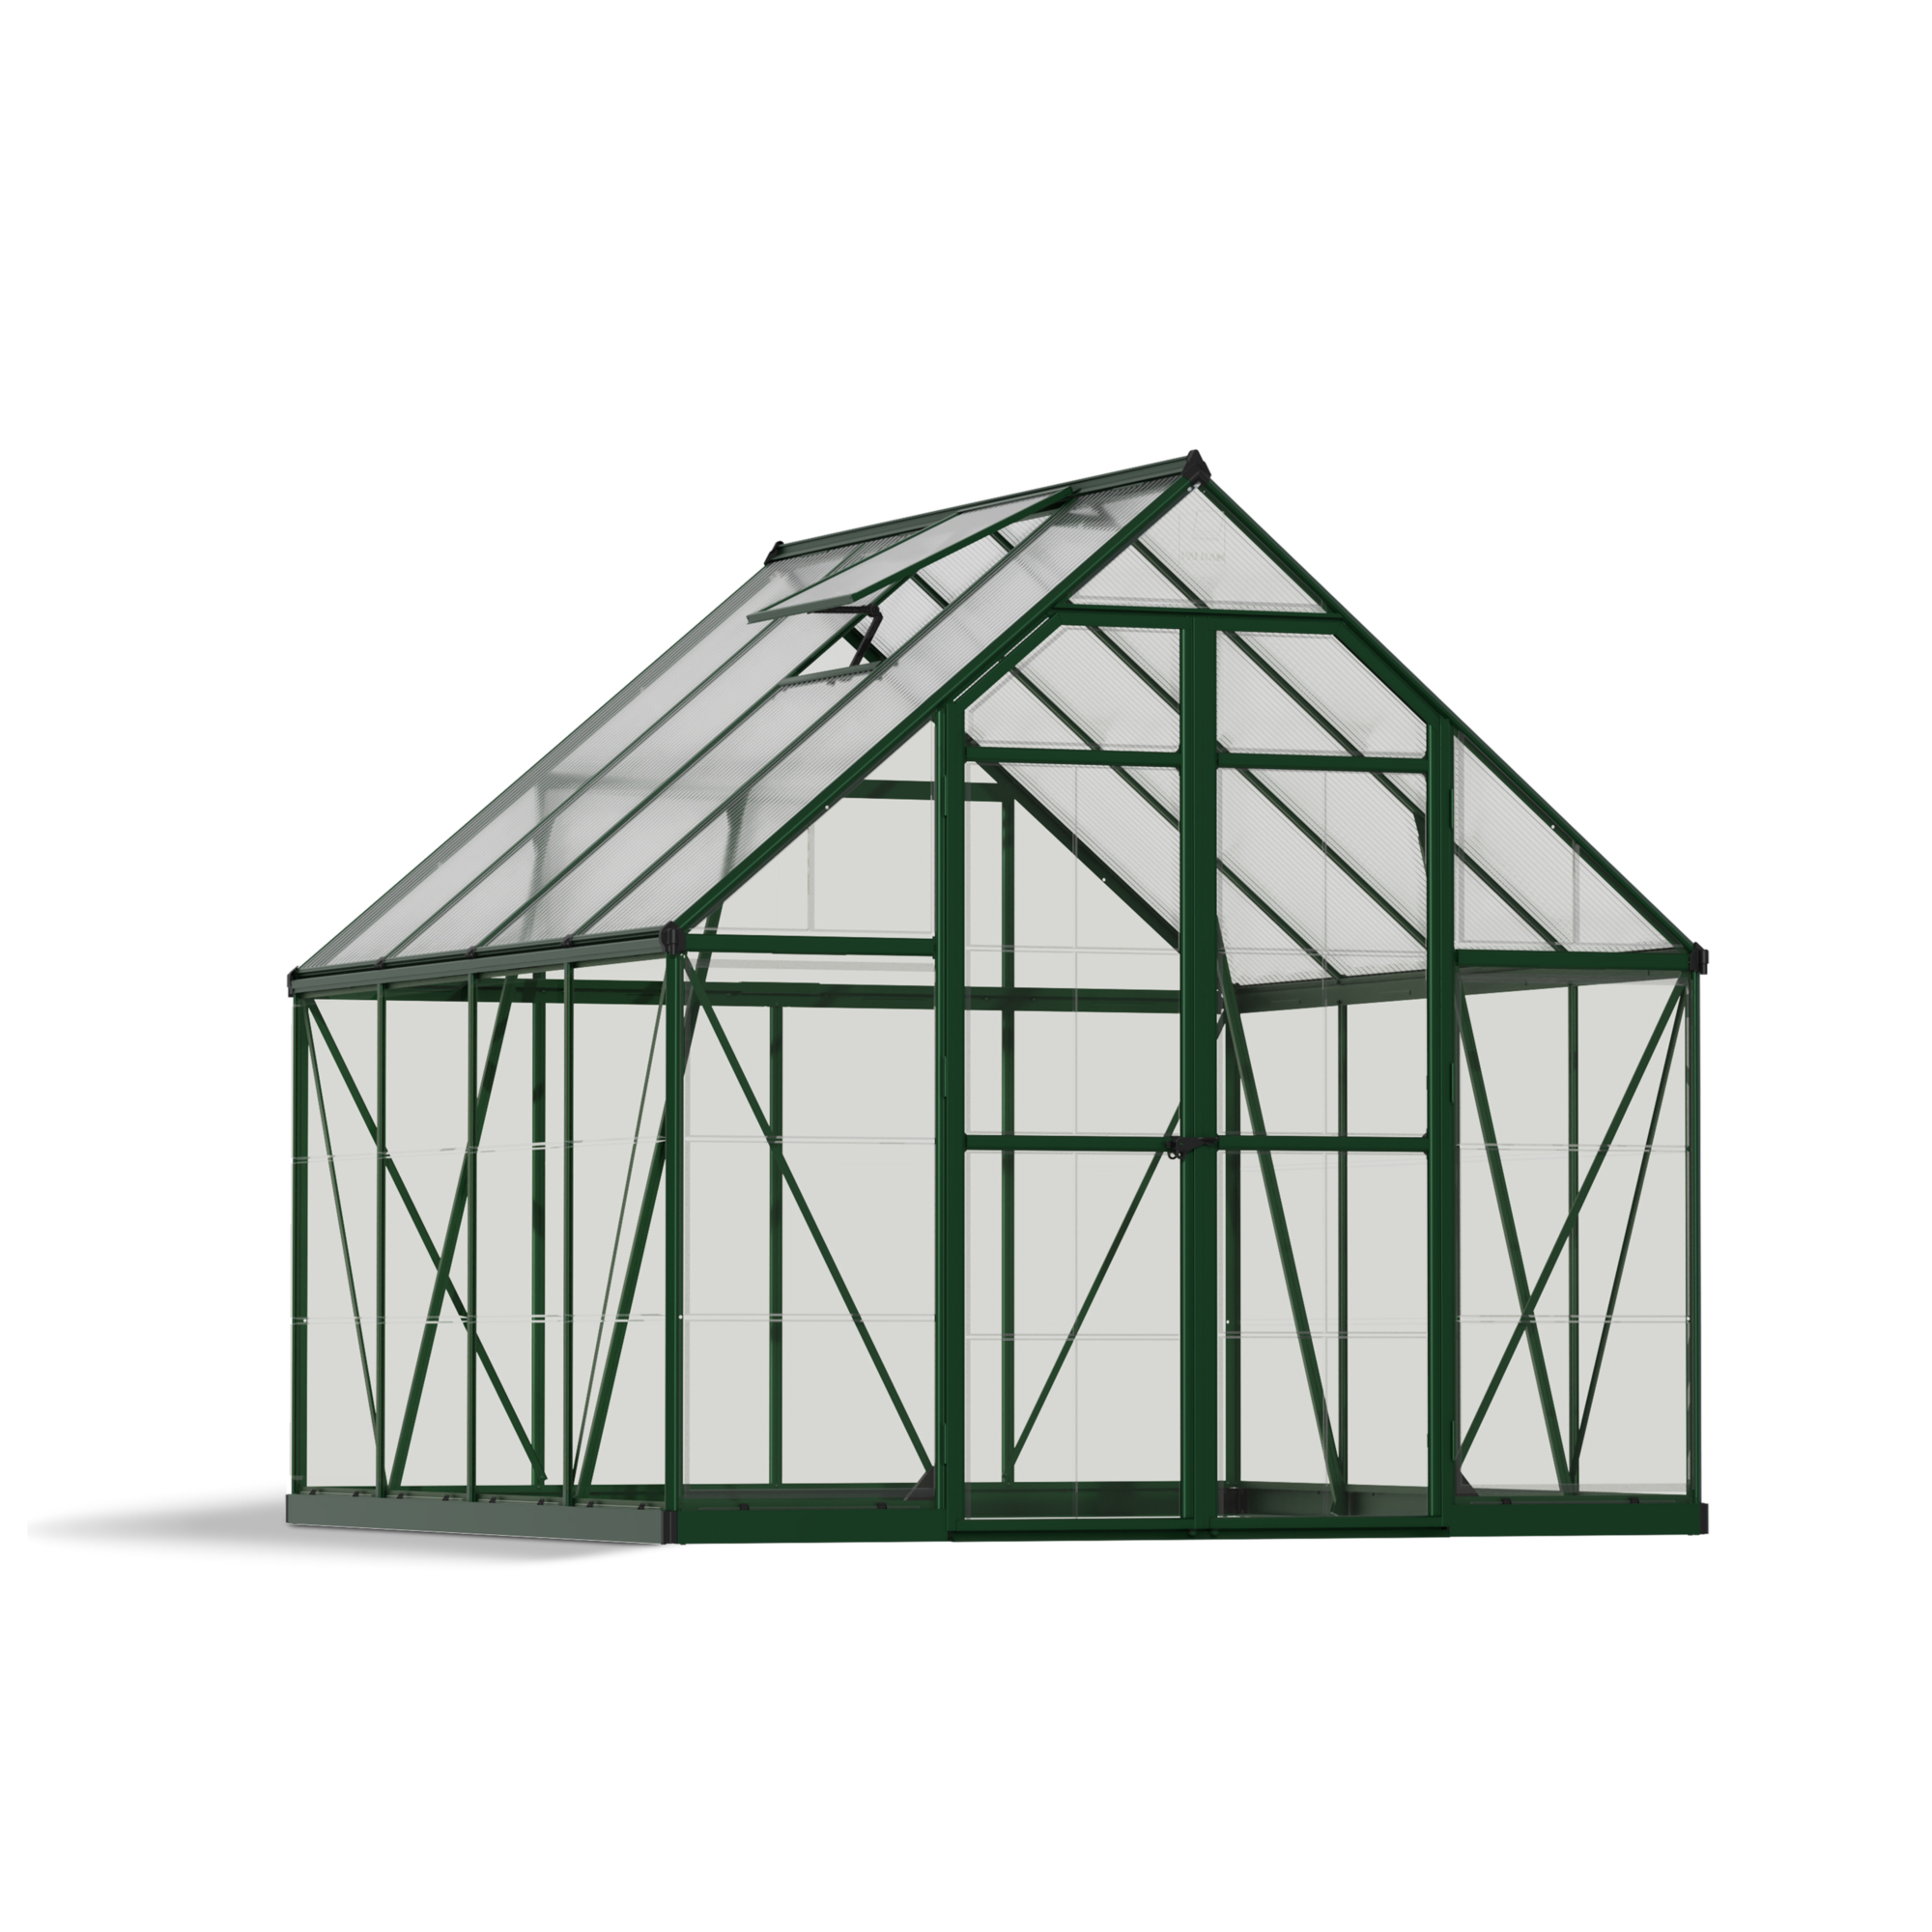 Poly-Tex Inc., 8ft. x 8ft. Greenhouse - Green, Length 96 in, Width 96 in, Center Height 91 in, Model 701924